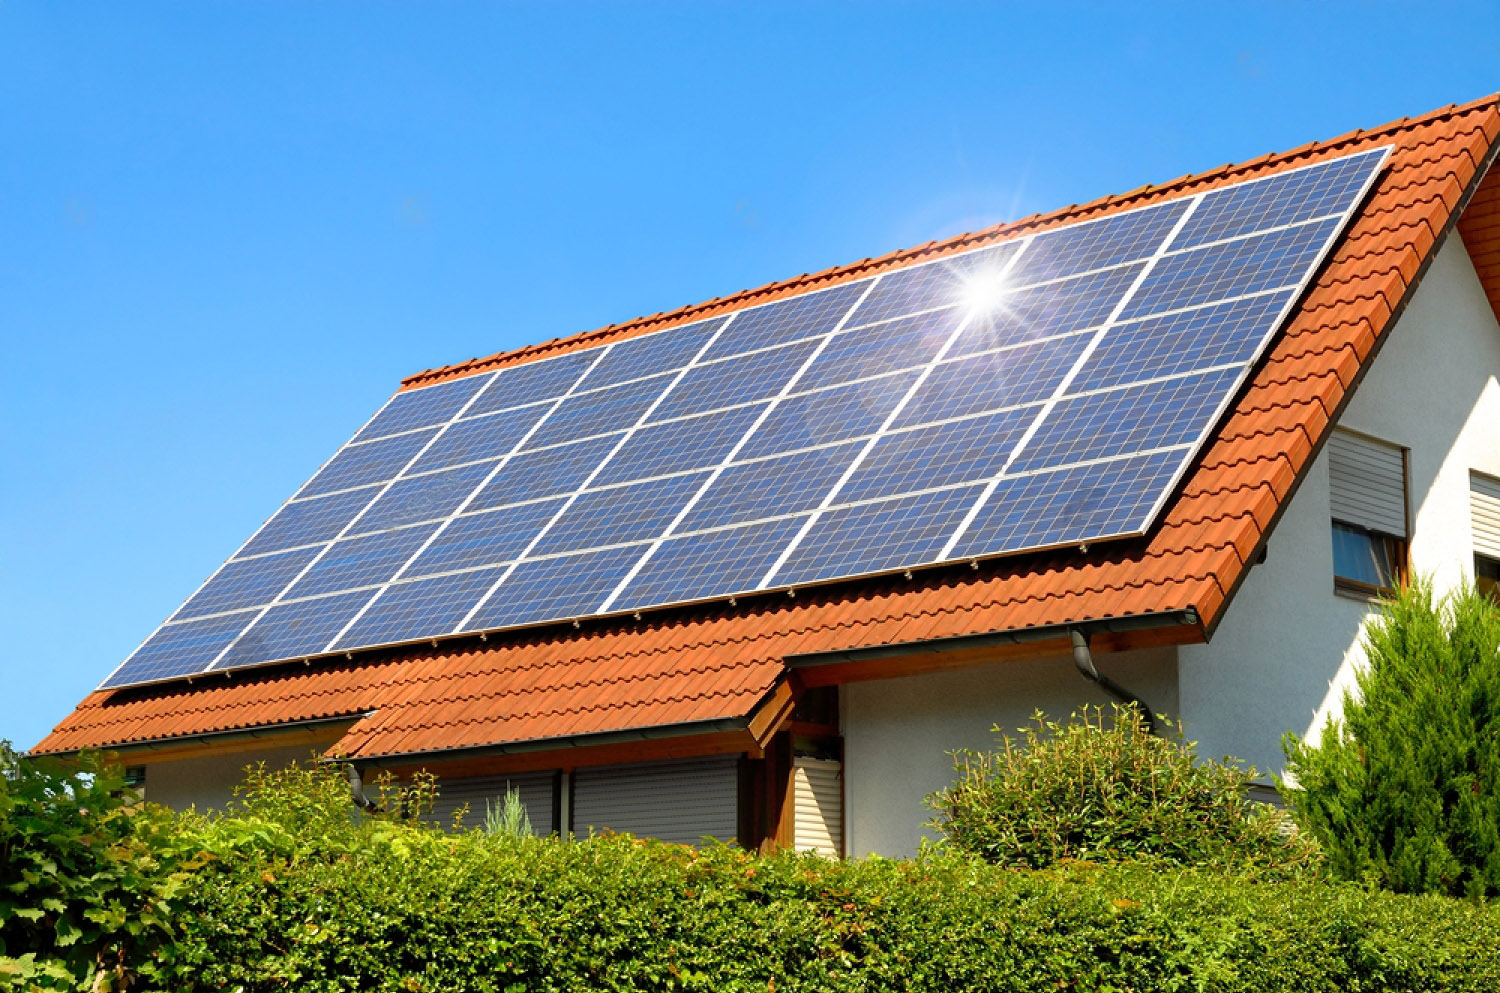 Find the Right Solar Panel That Fits Your Home